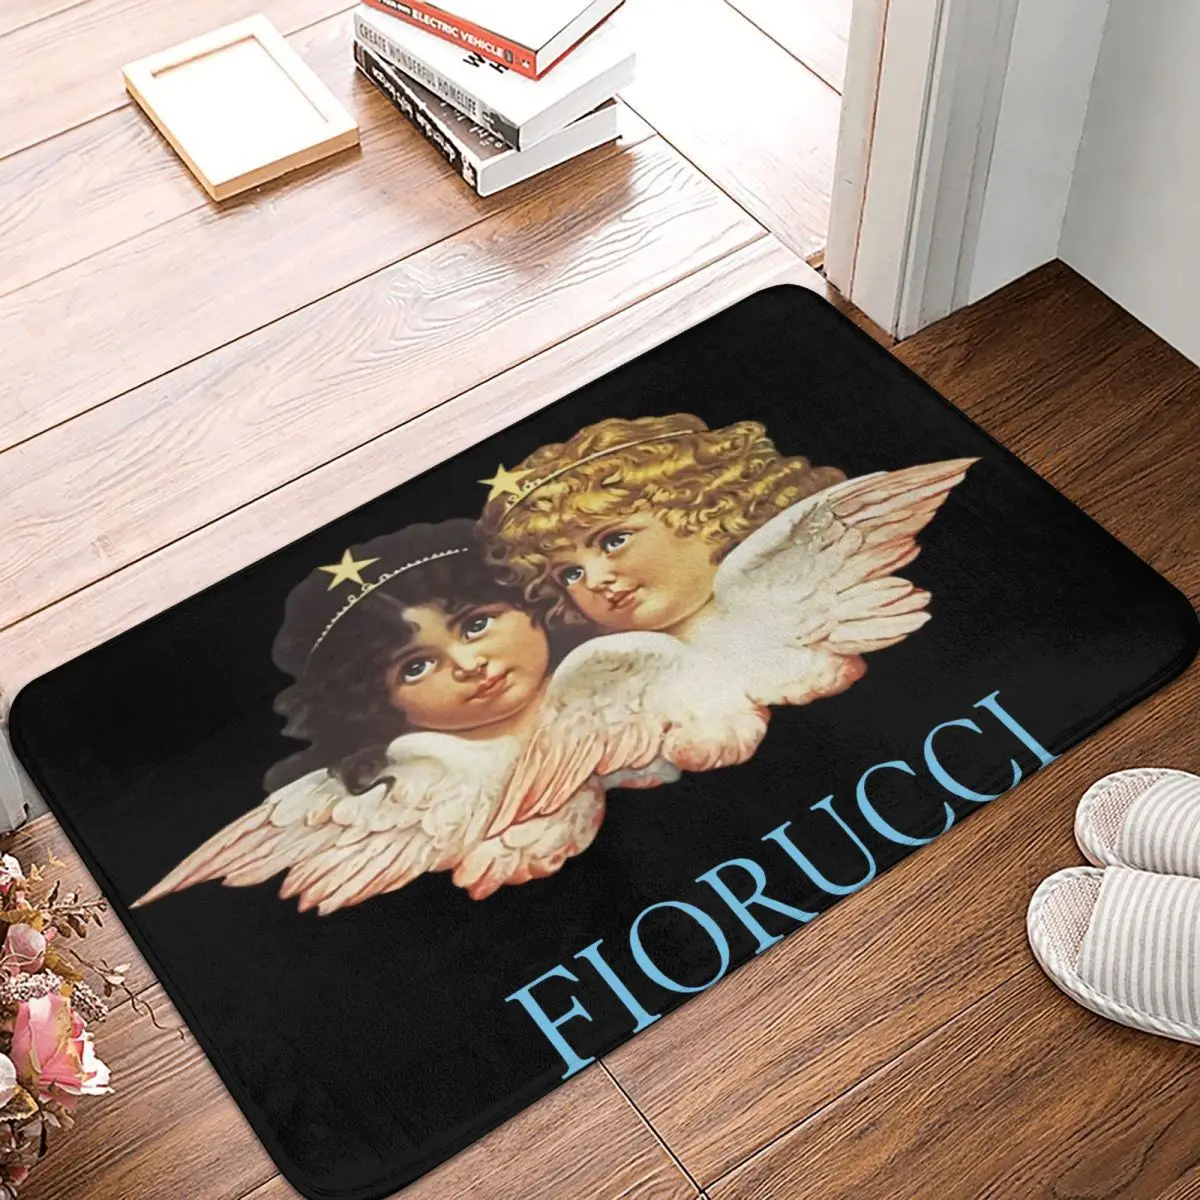 

Fiorucci Angels For Men And Women Carpet, Polyester Floor Mats Fashionable Doorway Outdoor Birthday Gifts Mats Customizable